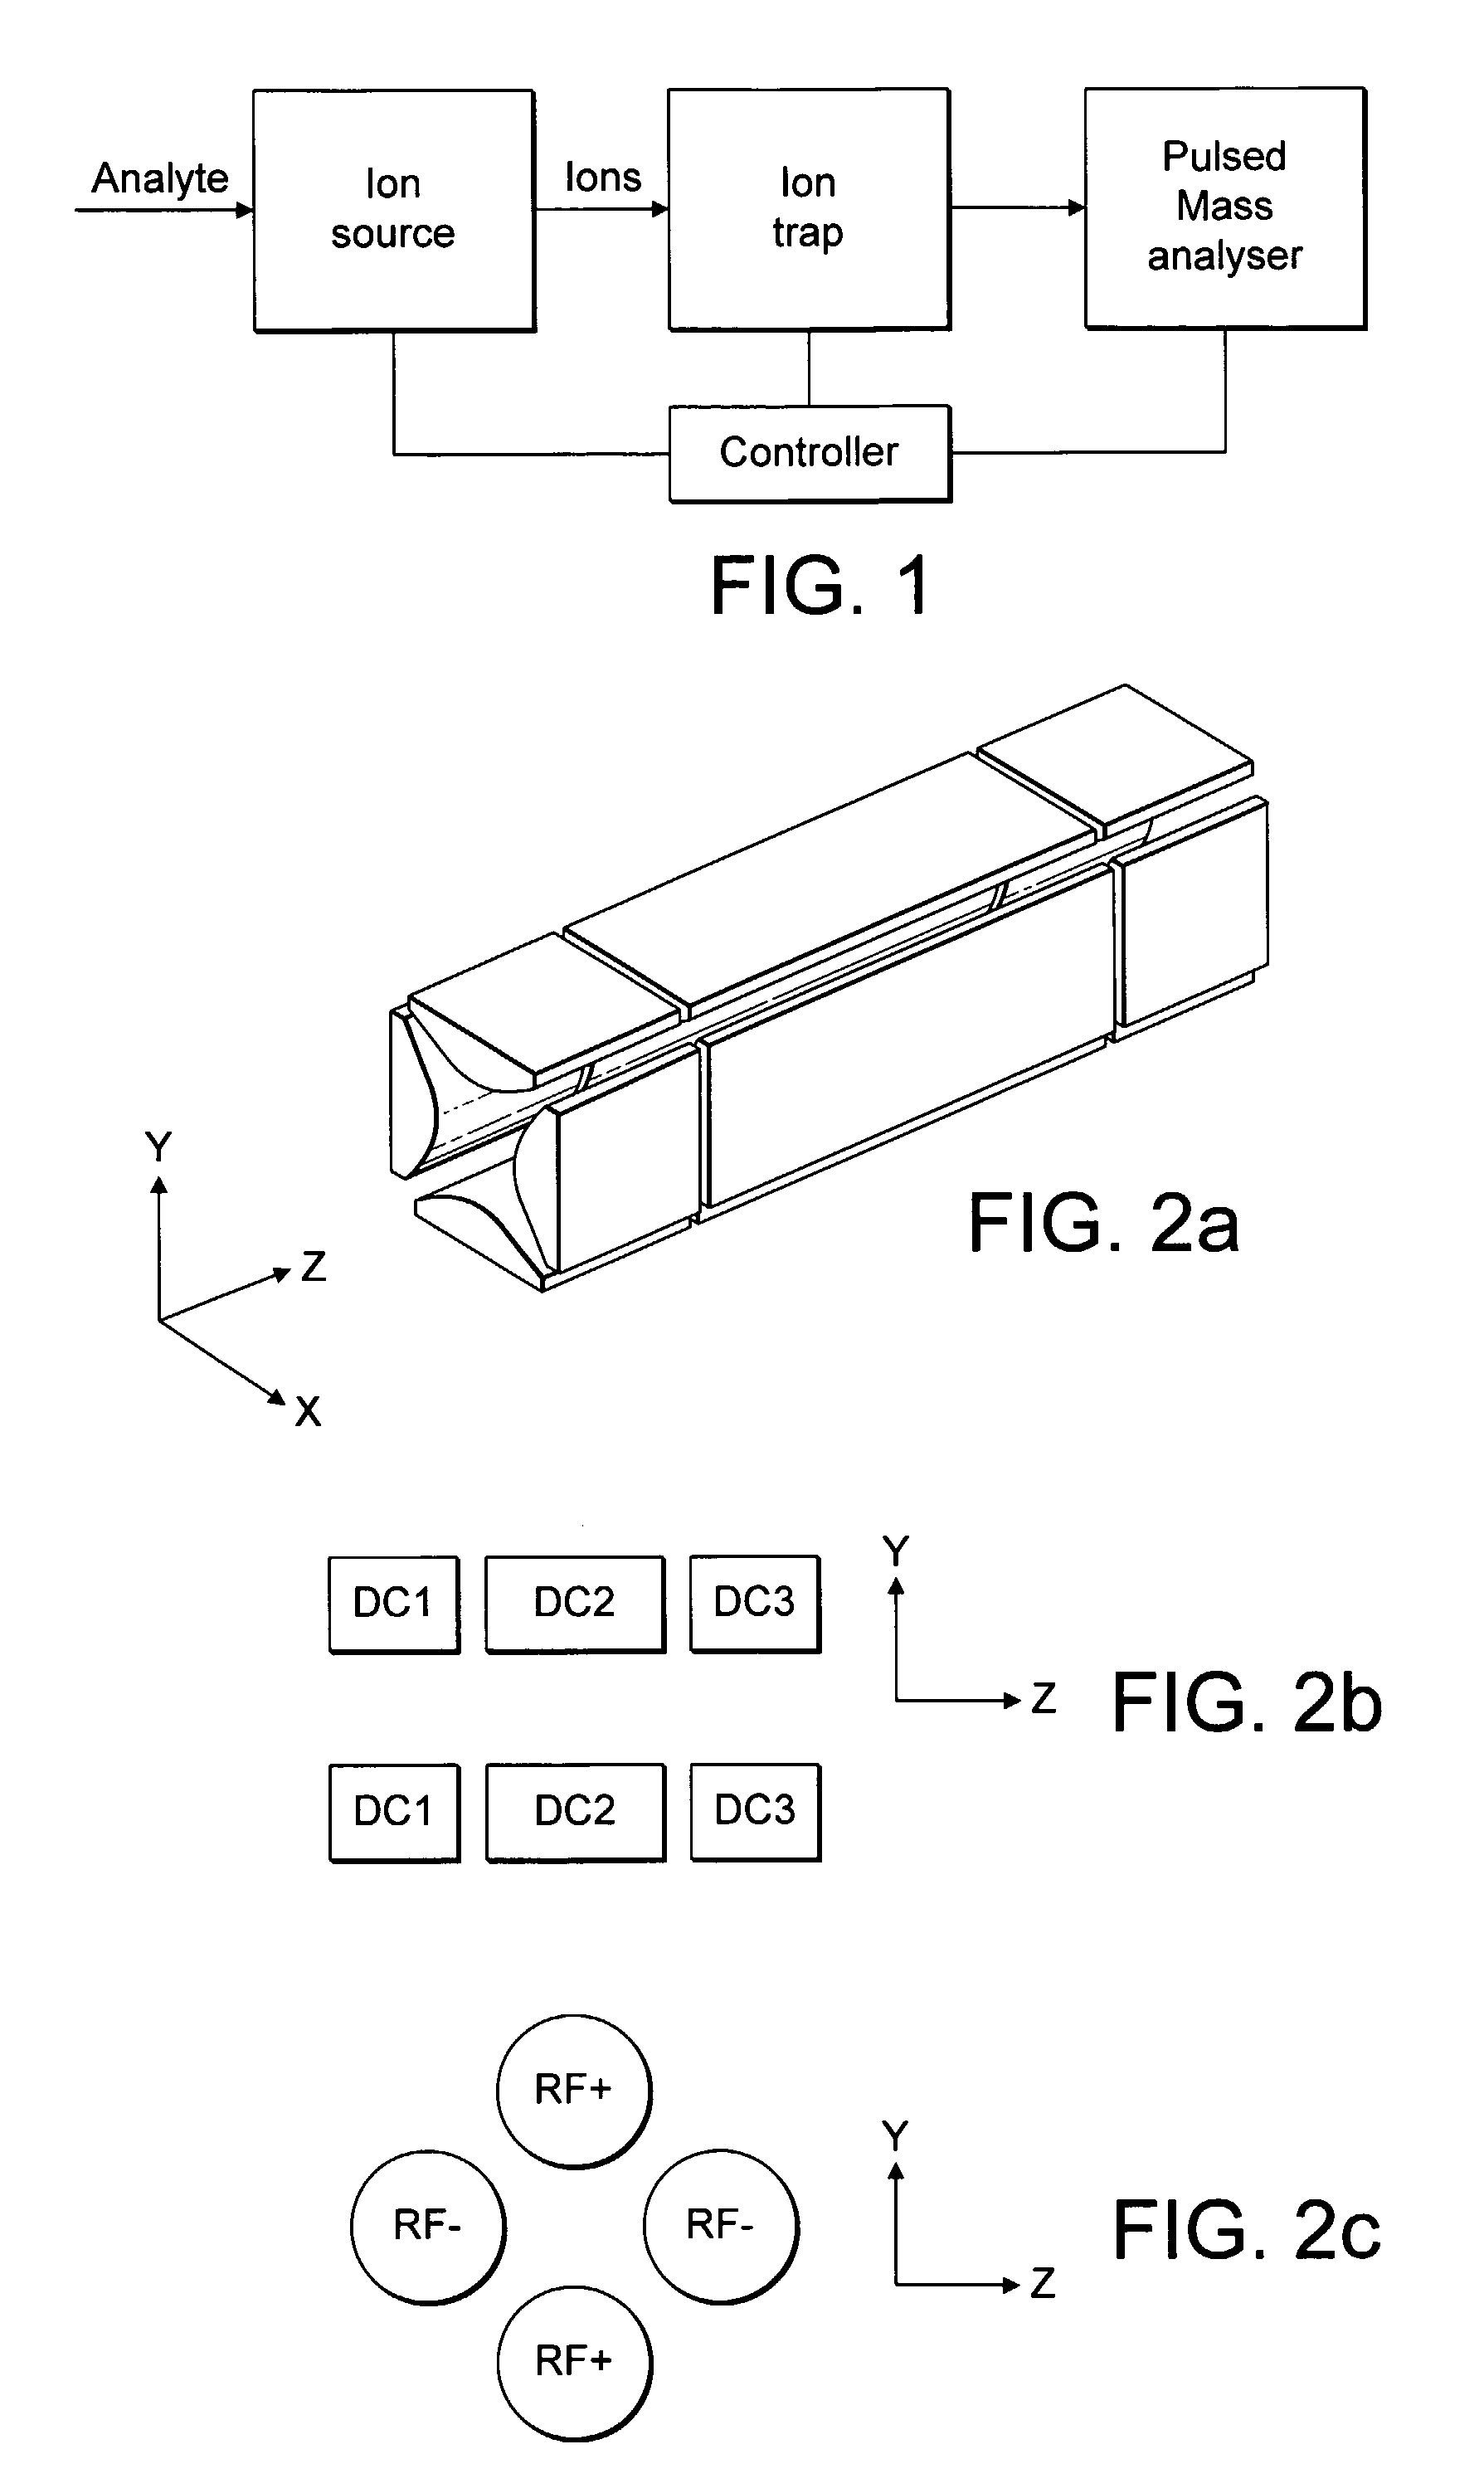 RF power supply for a mass spectrometer